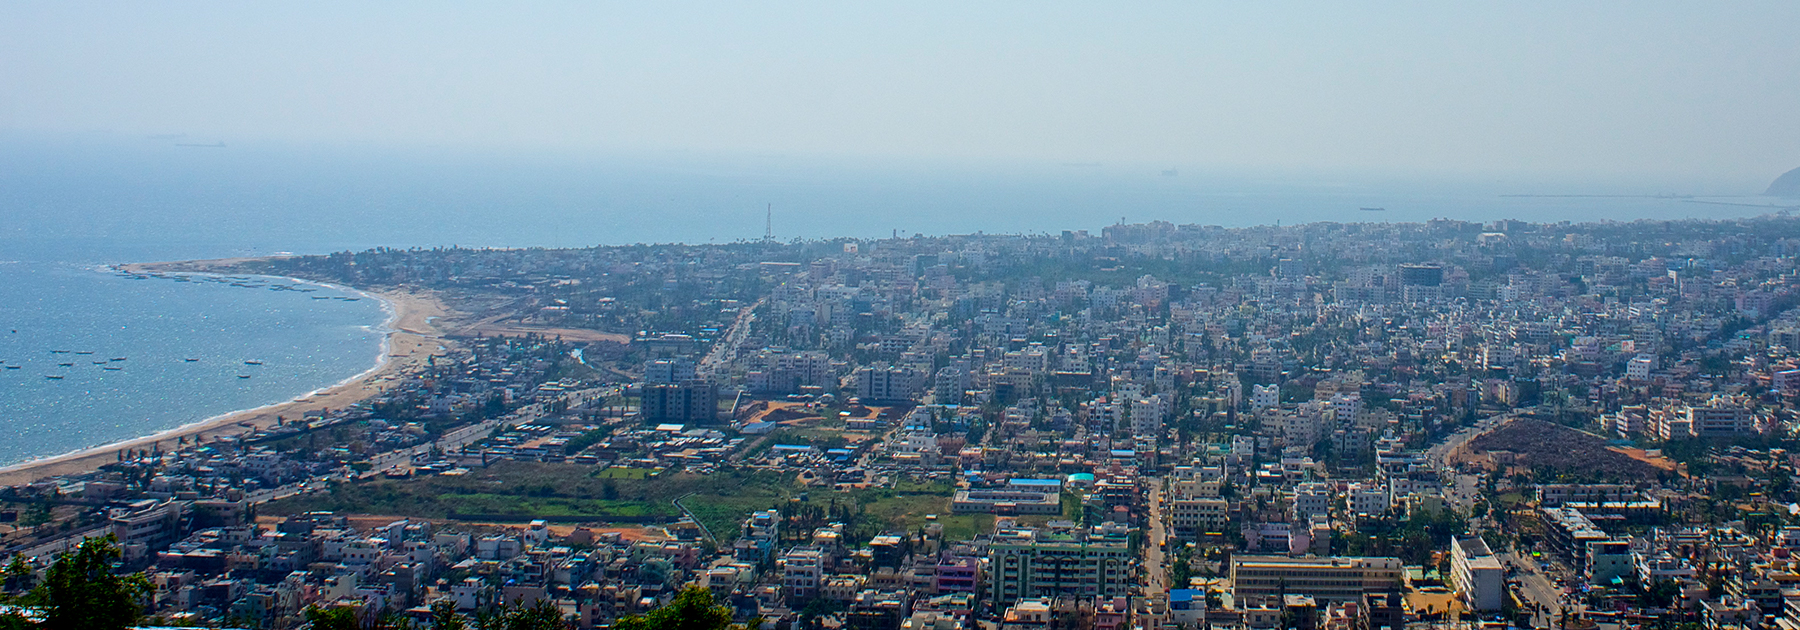 A view of Visakhapatnam from the city's Kailasagiri Park (Av9, licensed under CC BY-SA 4.0)